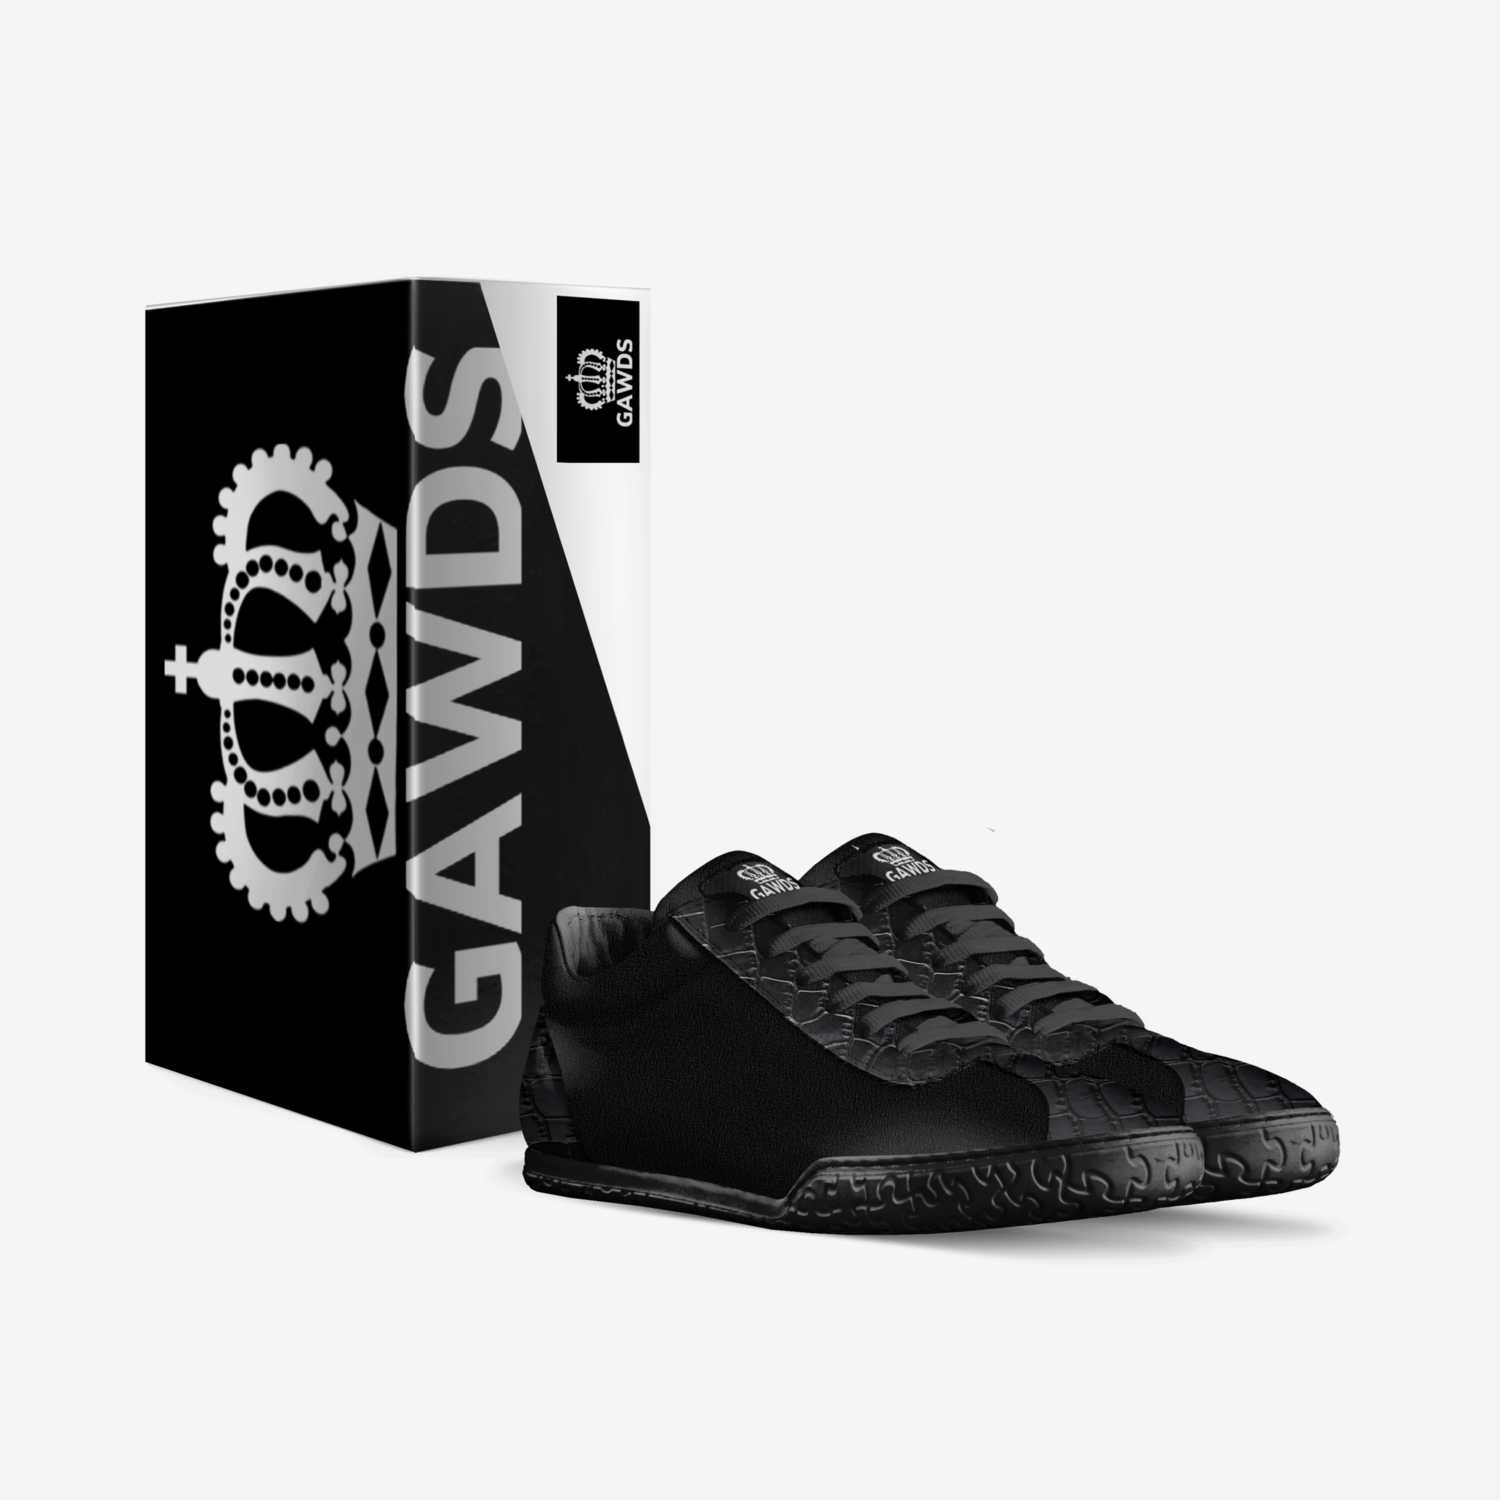 GAWDS custom made in Italy shoes by Crisis Fresh | Box view